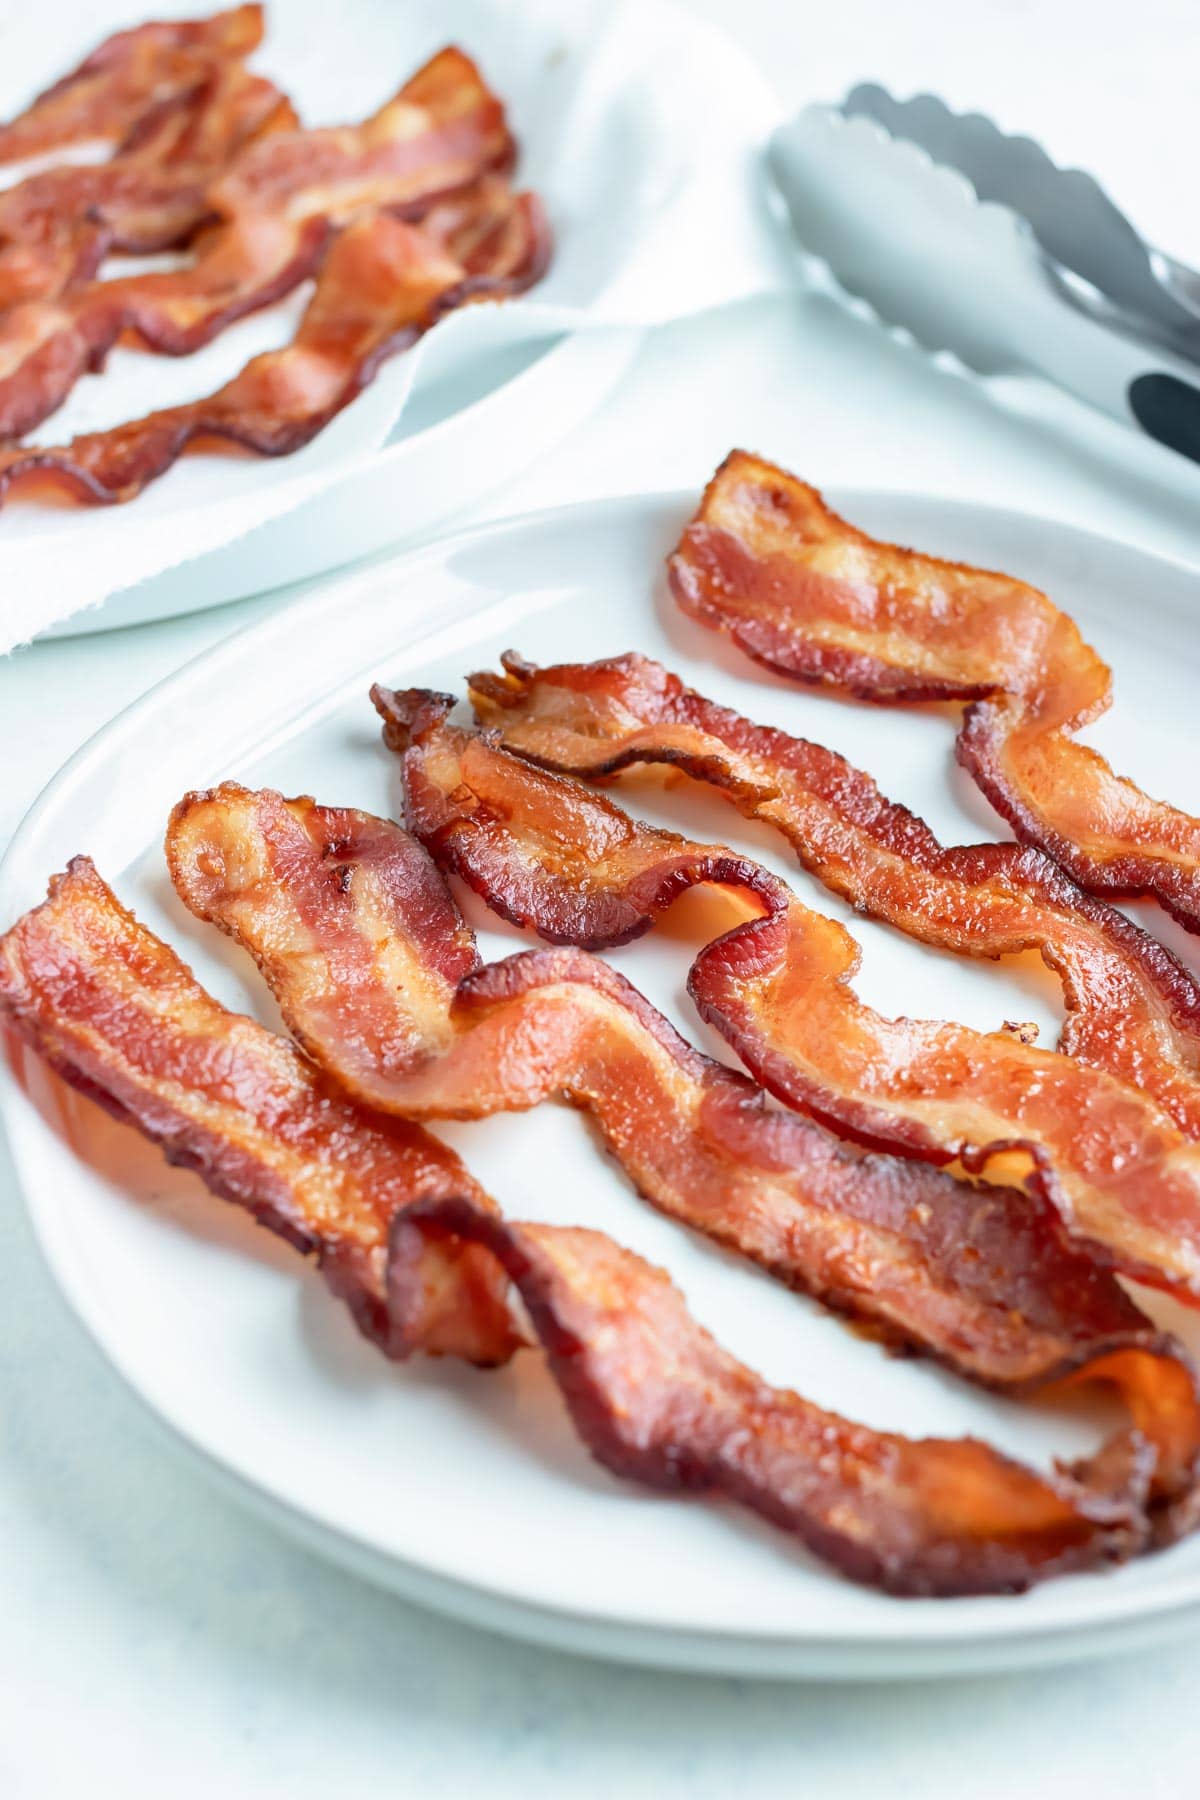 Extra crispy bacon is served on a plate.